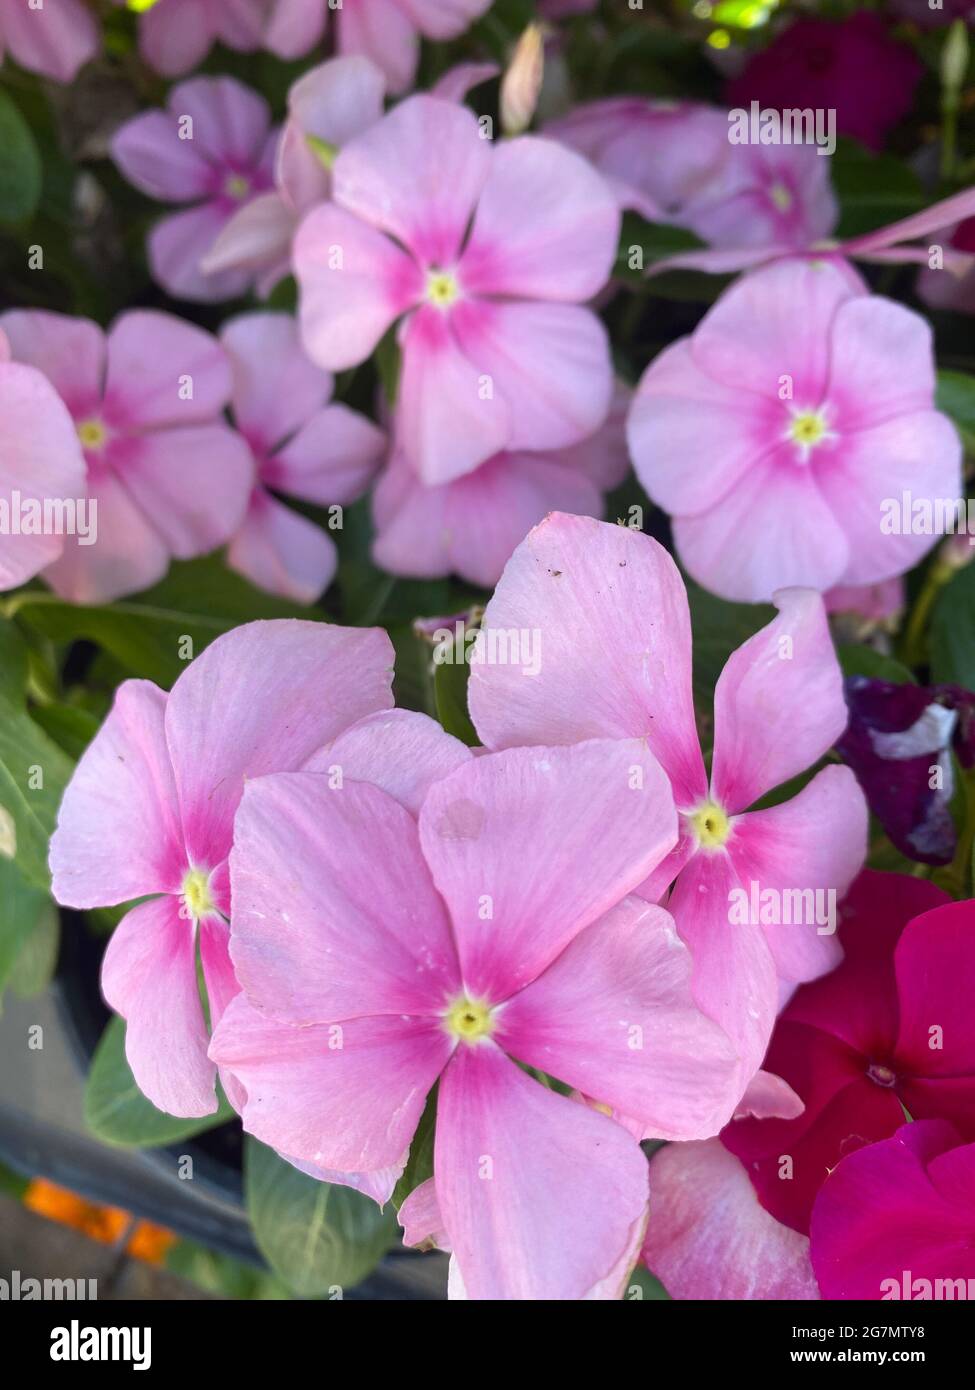 Impatiens walleriana, also known as busy Lizzie, balsam, sultana, or simply impatiens, is a species of the genus Impatiens, native to eastern Africa from Kenya to Mozambique. Stock Photo